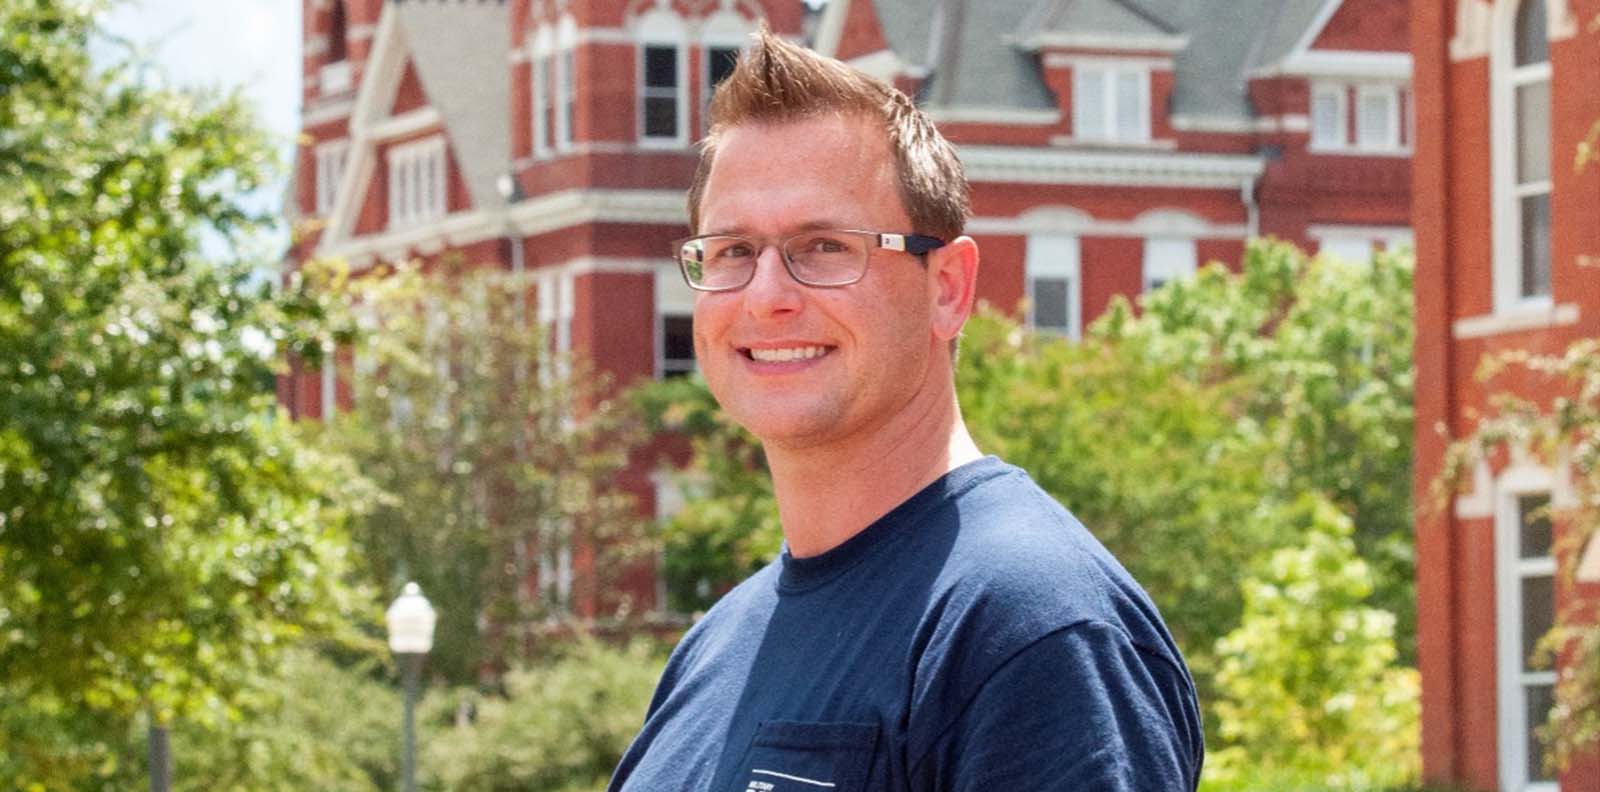 DR. NICK FRYE-COX ACCEPTS FACULTY POSITION